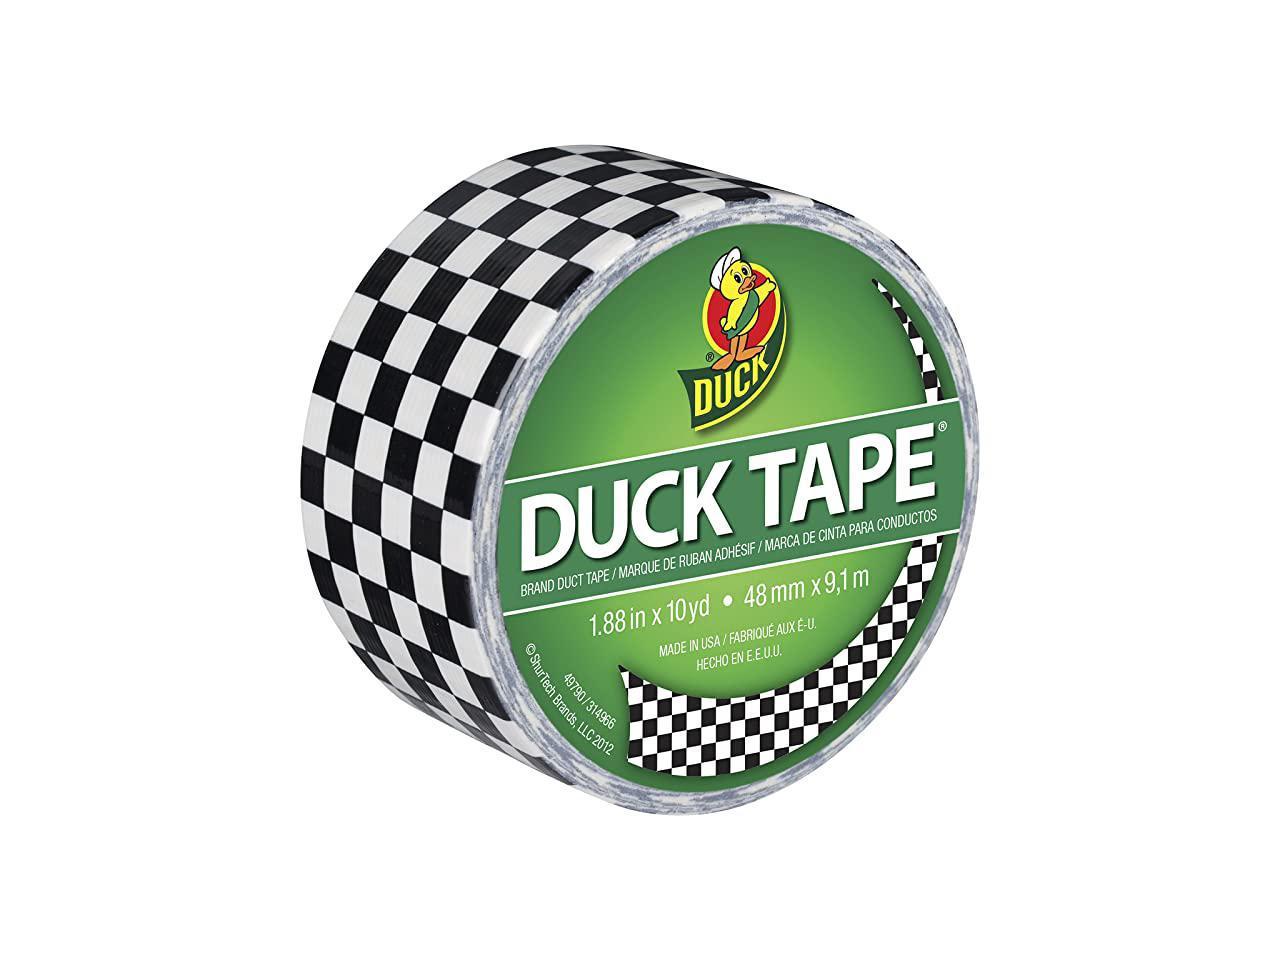 Single Roll Duck Brand 241789 Printed Duct Tape 1.88 Inches x 10 Yards Cacti 